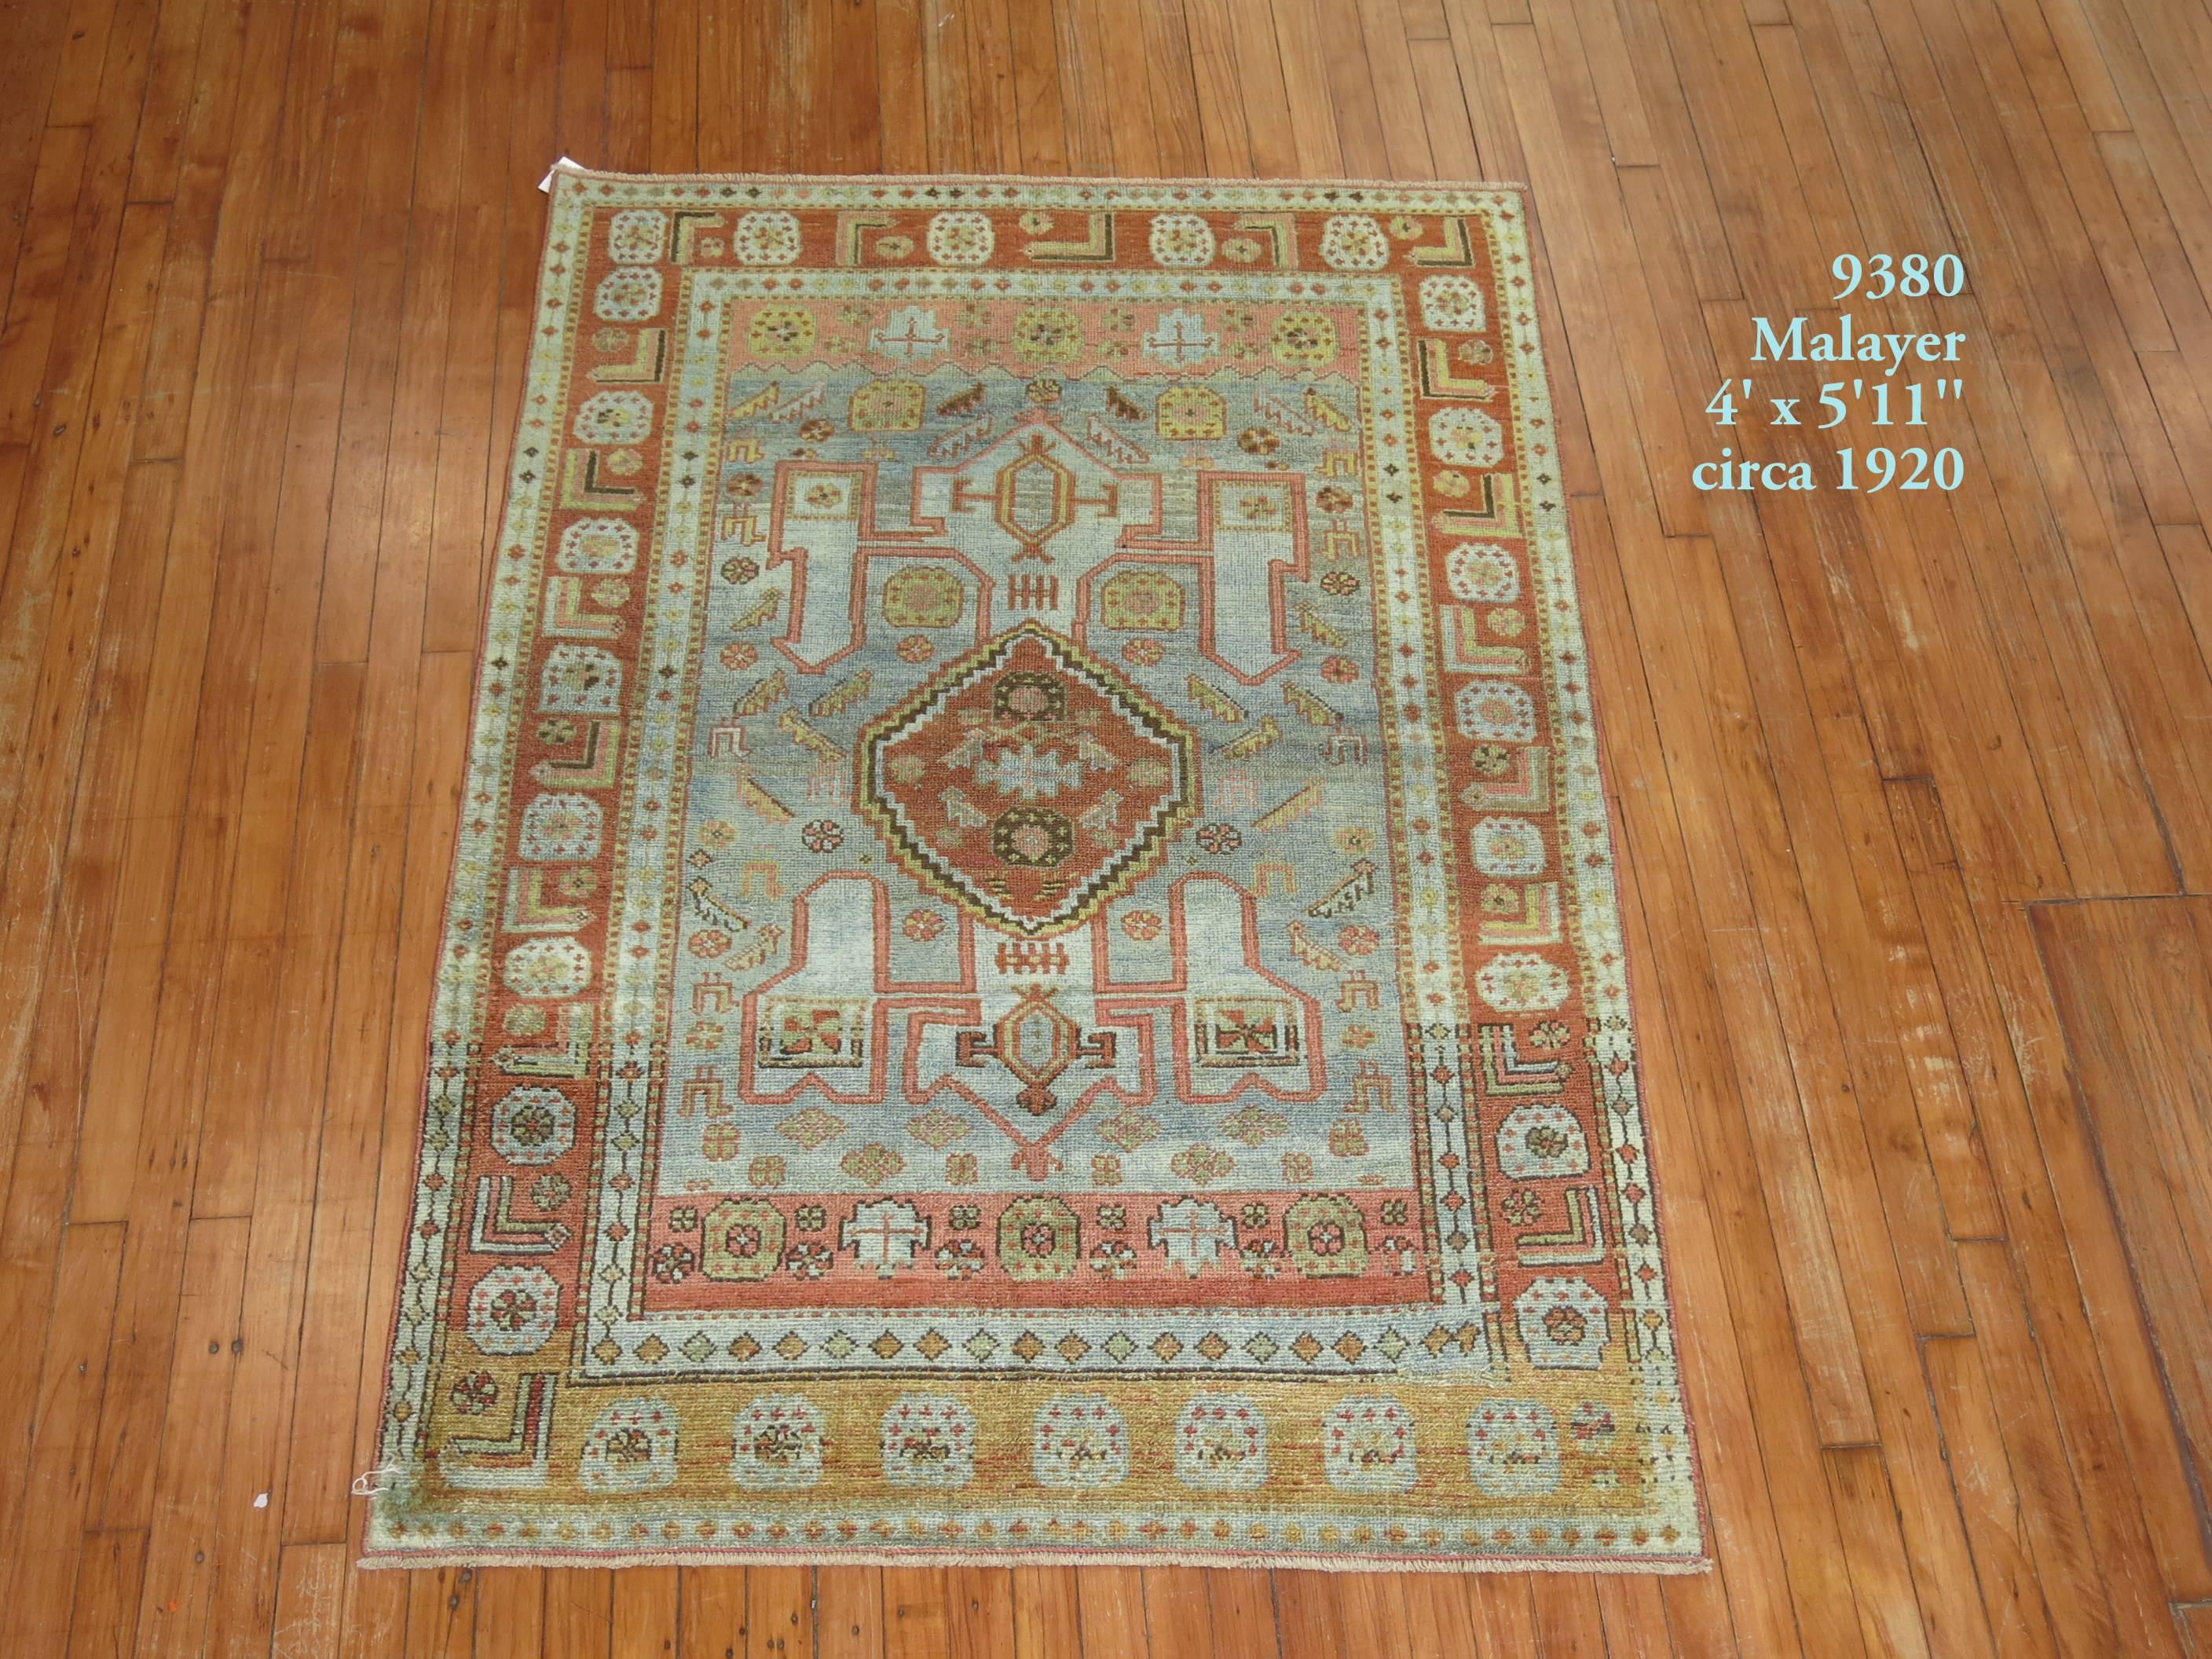 Accent size Persian Malayer rug. Malayers are becoming one of the more popular decorative pieces amongst interior designers and architects worldwide,

circa 1920. Measures: 4' x 5'11''.